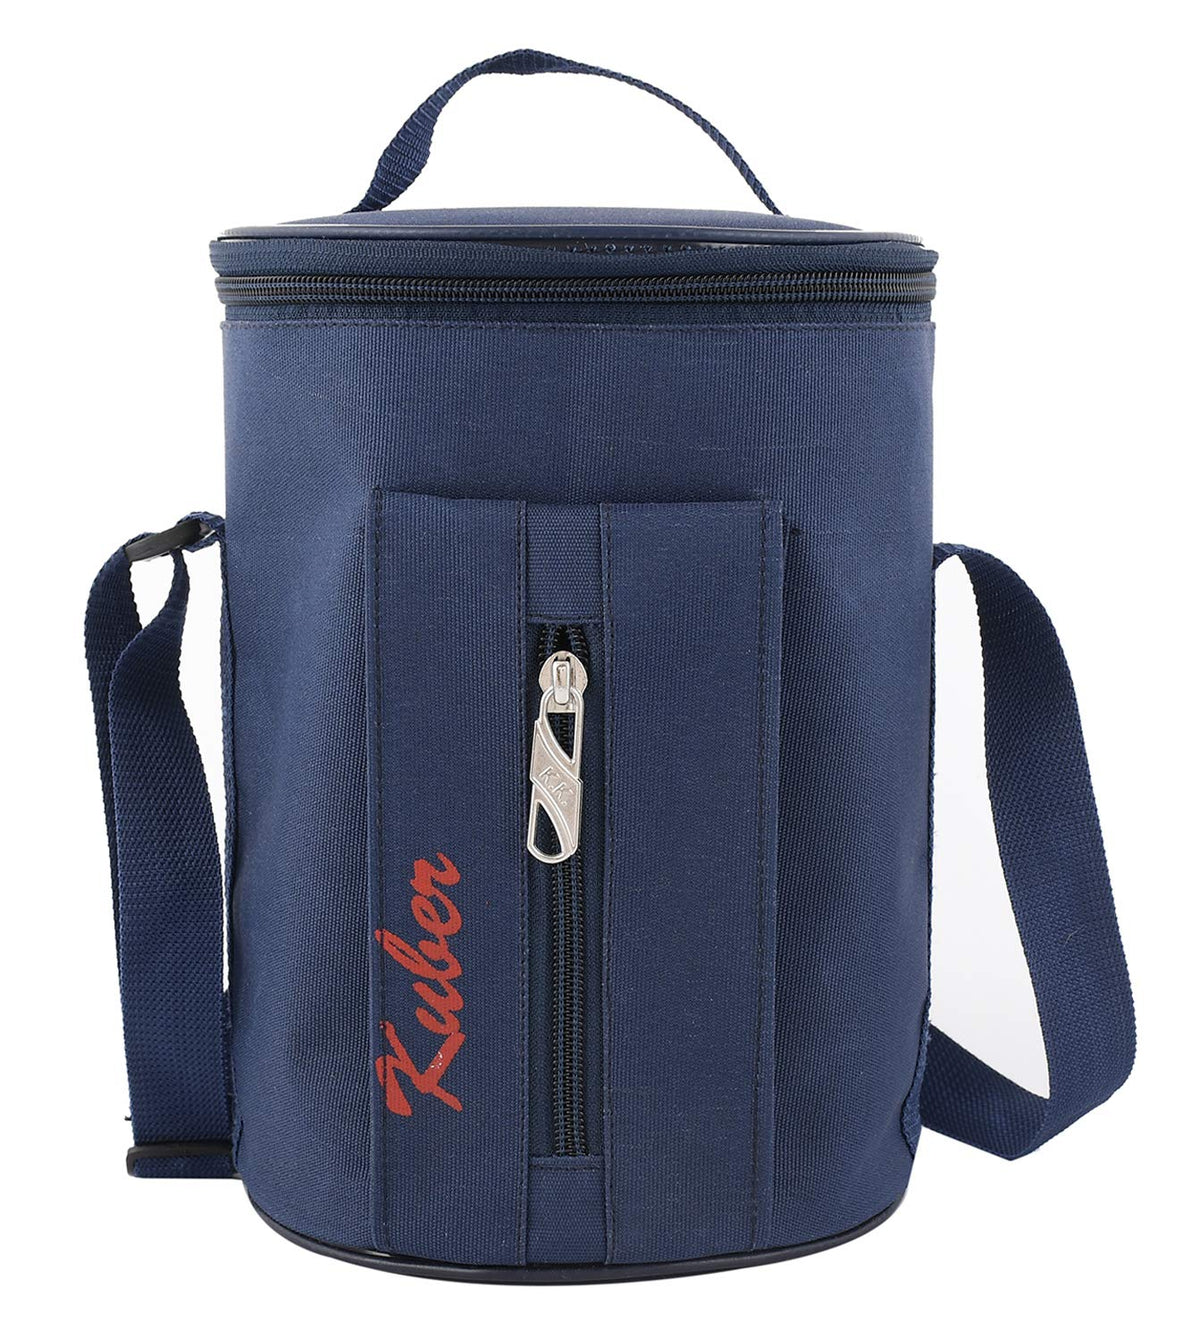 Kuber Industries Canvas Waterproof Lunch Carry Bag, Suitable for 3 Compartment (Blue) -CTKTC039121